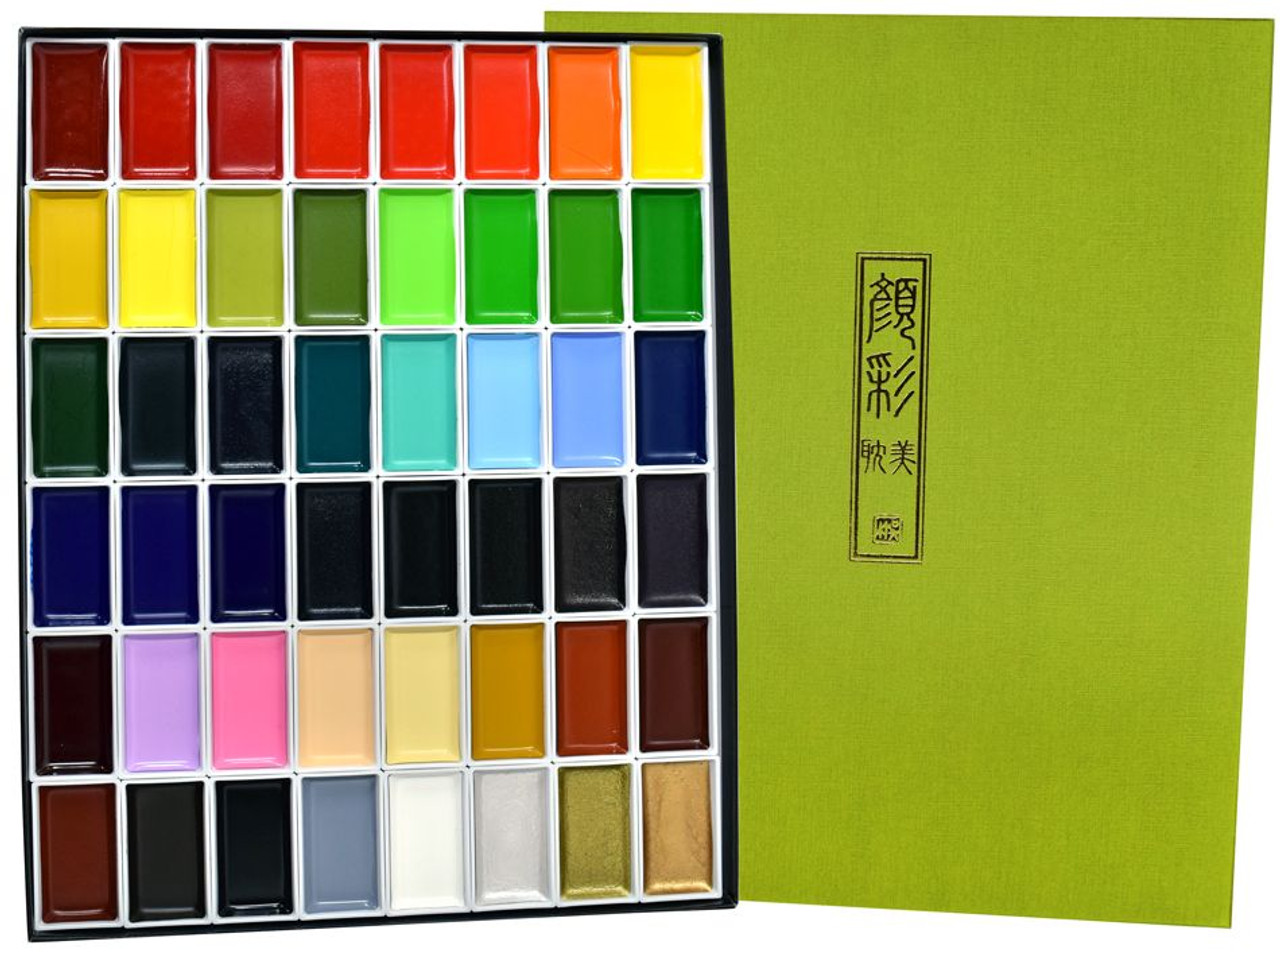 48 Pack of Water Color and Crayon Art Sets (w/ brush & pallet)